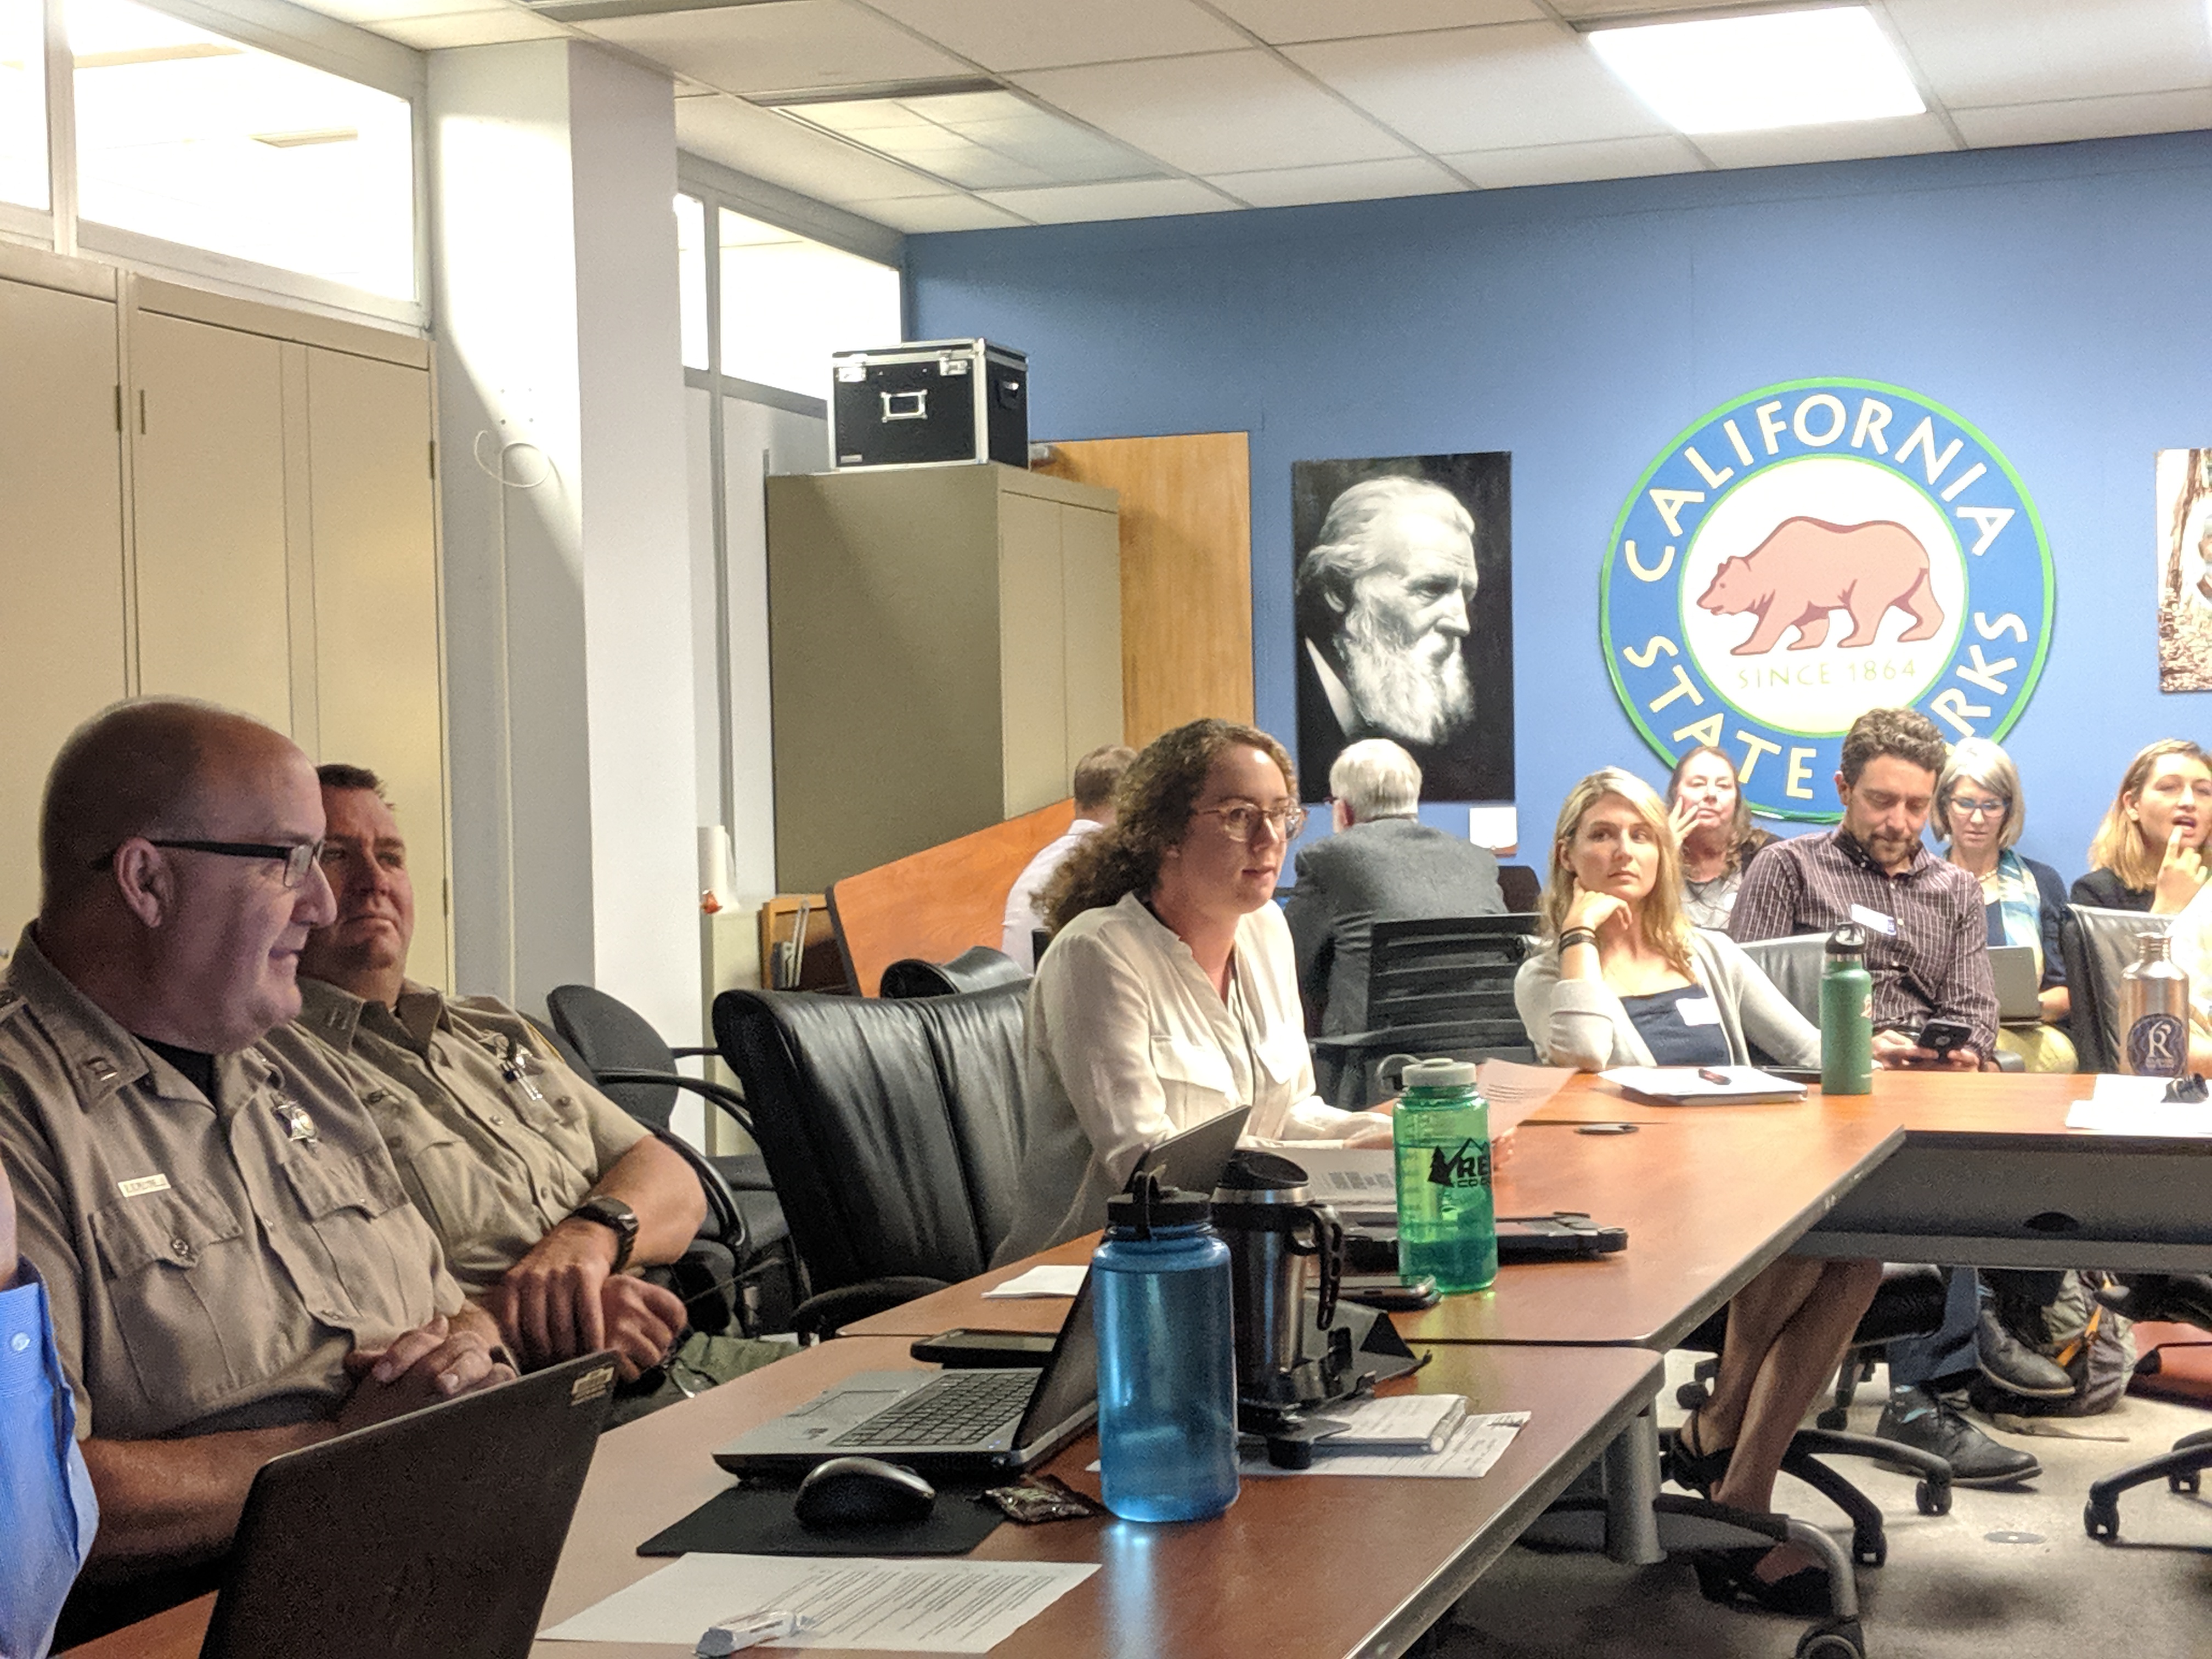 Me presenting on my project, the Coastal Fishing Communities Project, to the Marine Resources Committee on Nov 5, 2019.